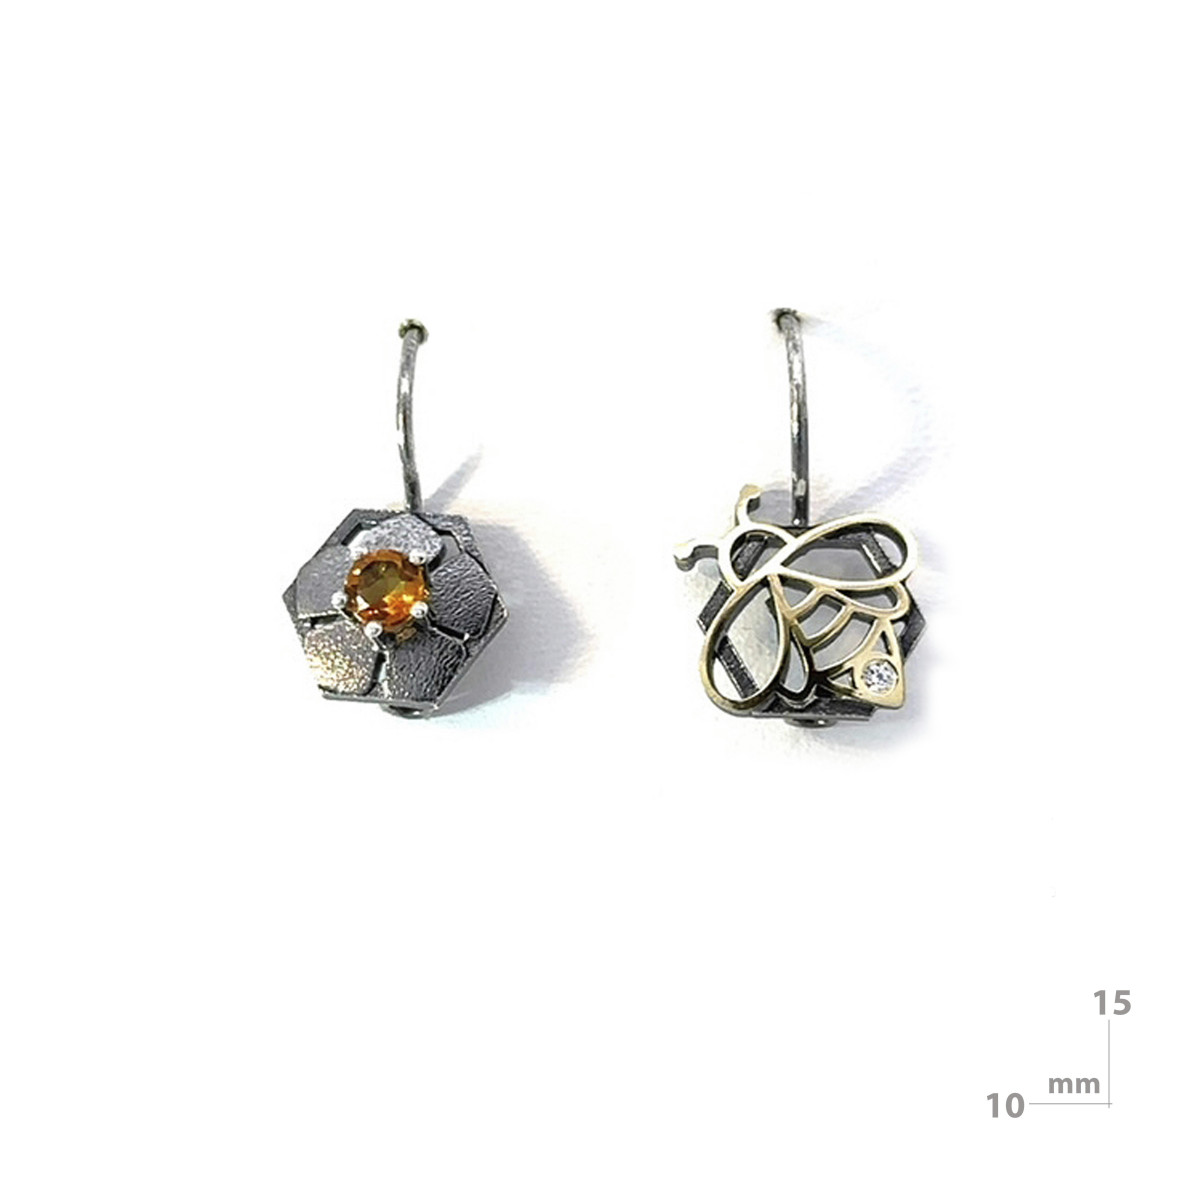 Silver, gold, brilliant and citrine earrings